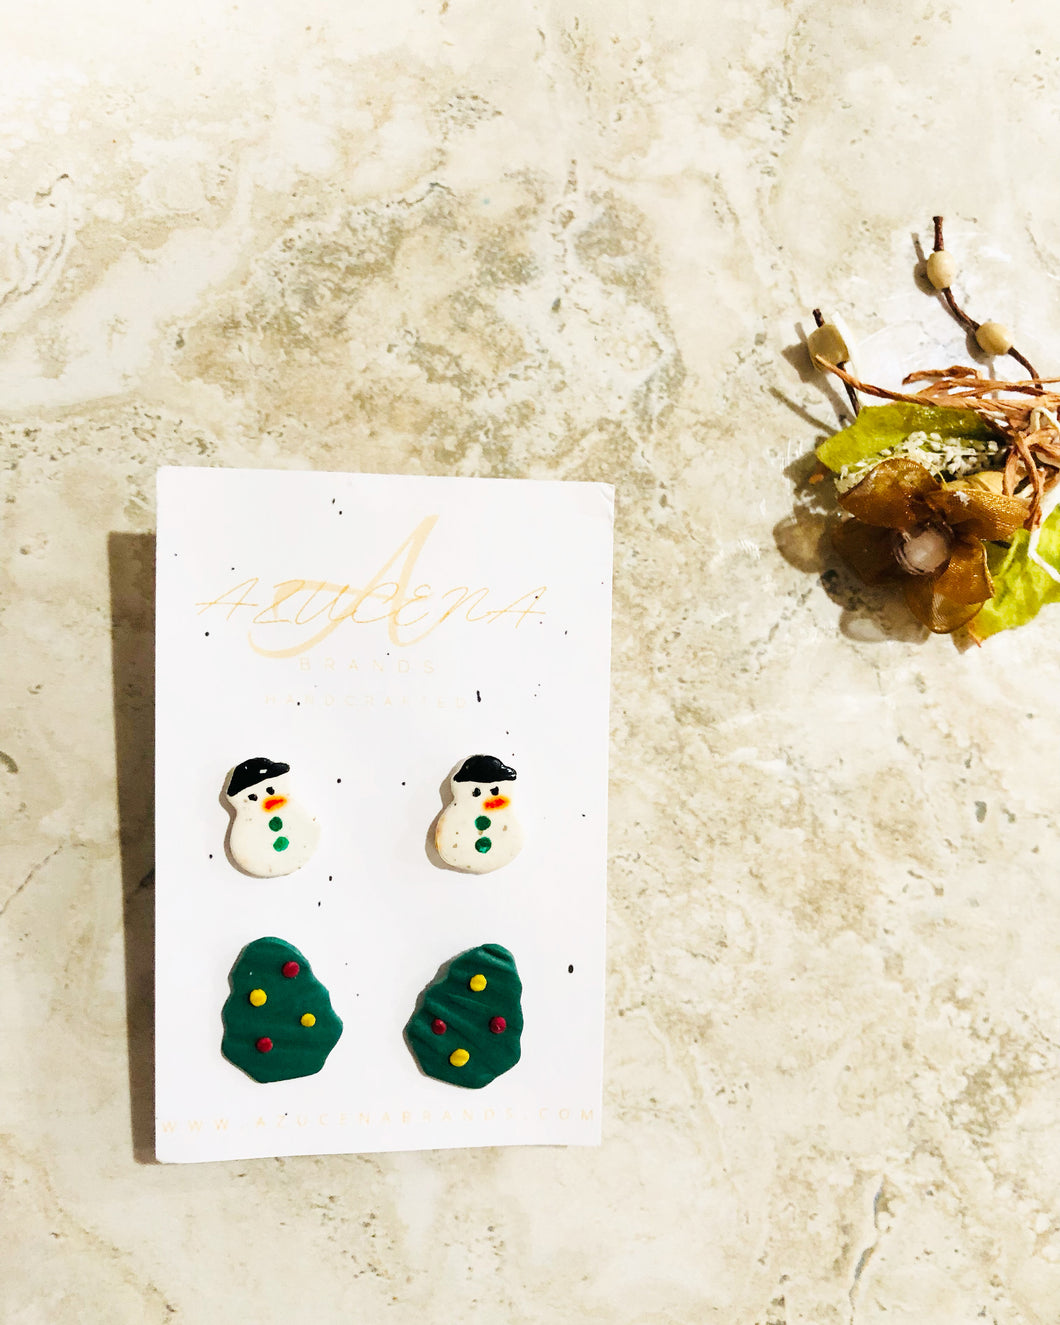 Snowman Studs - Handmade Polymer Clay Earrings with Hypoallergenic Stainless Steel Posts and Backs and Christmas Trees 